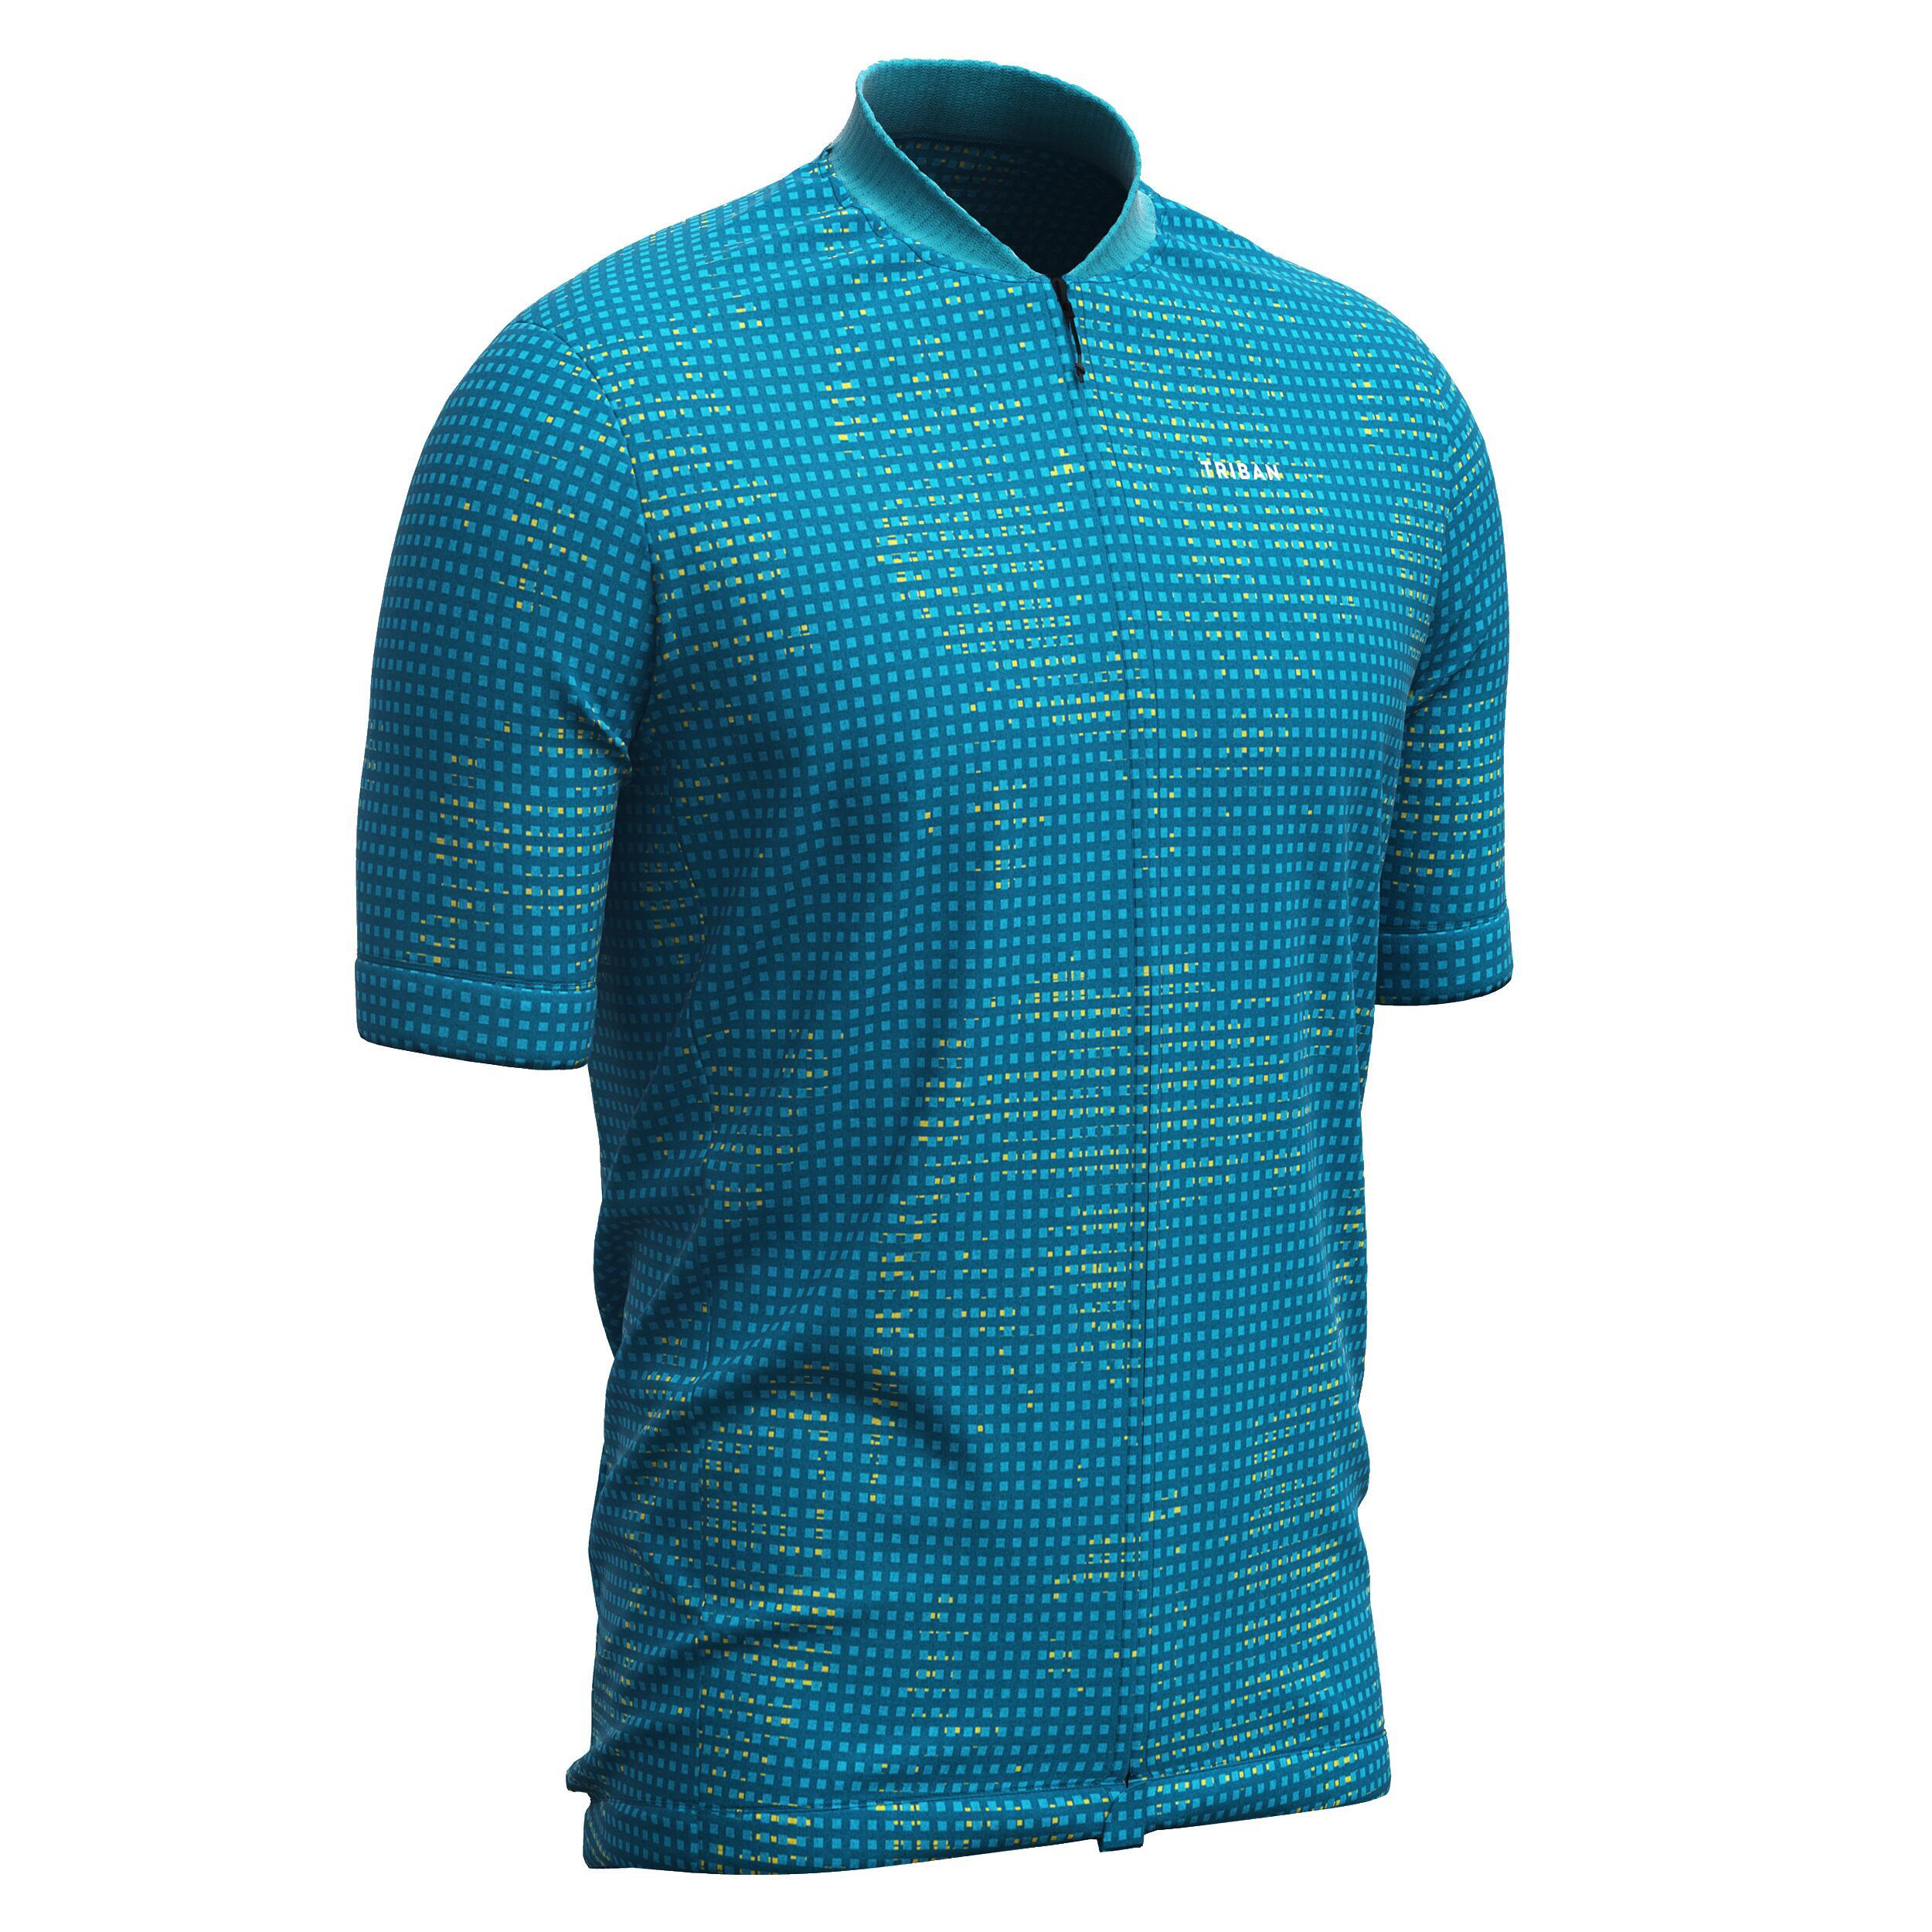 TRIBAN Men's Short-Sleeved Road Cycling Summer Jersey RC100 - Turquoise